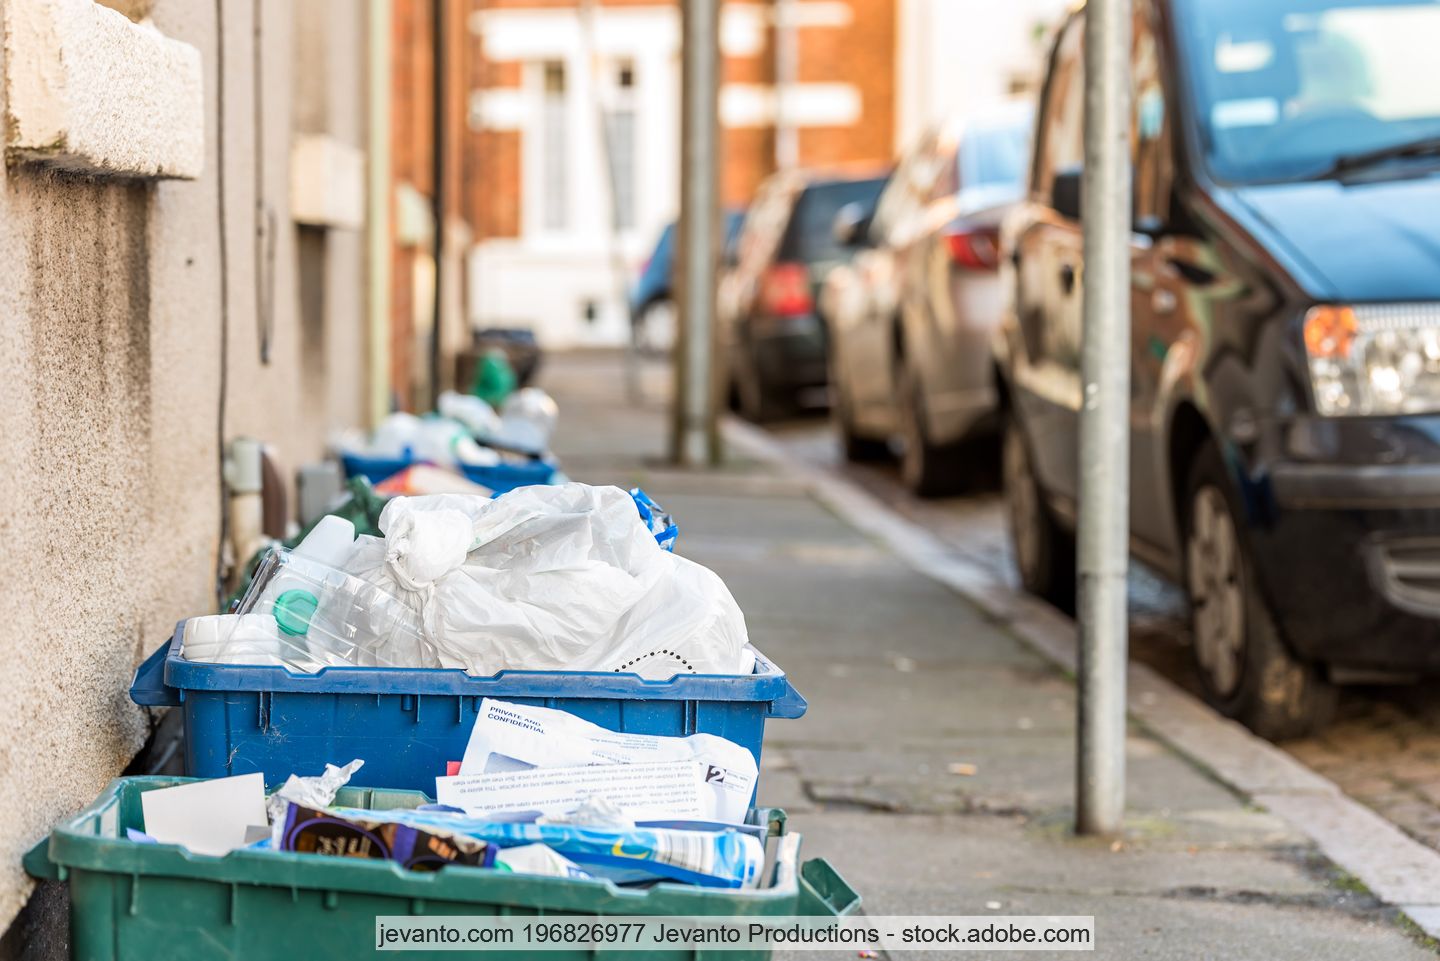 Bins for kerbside collections of recyclable materials set out on the pavement in the UK